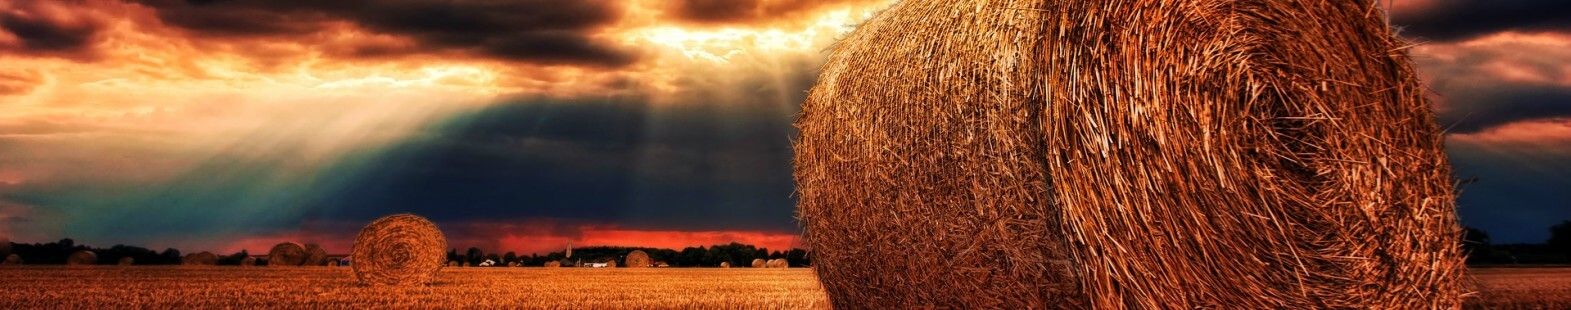 Photo shows a field with bails of hay and setting sun in the distance